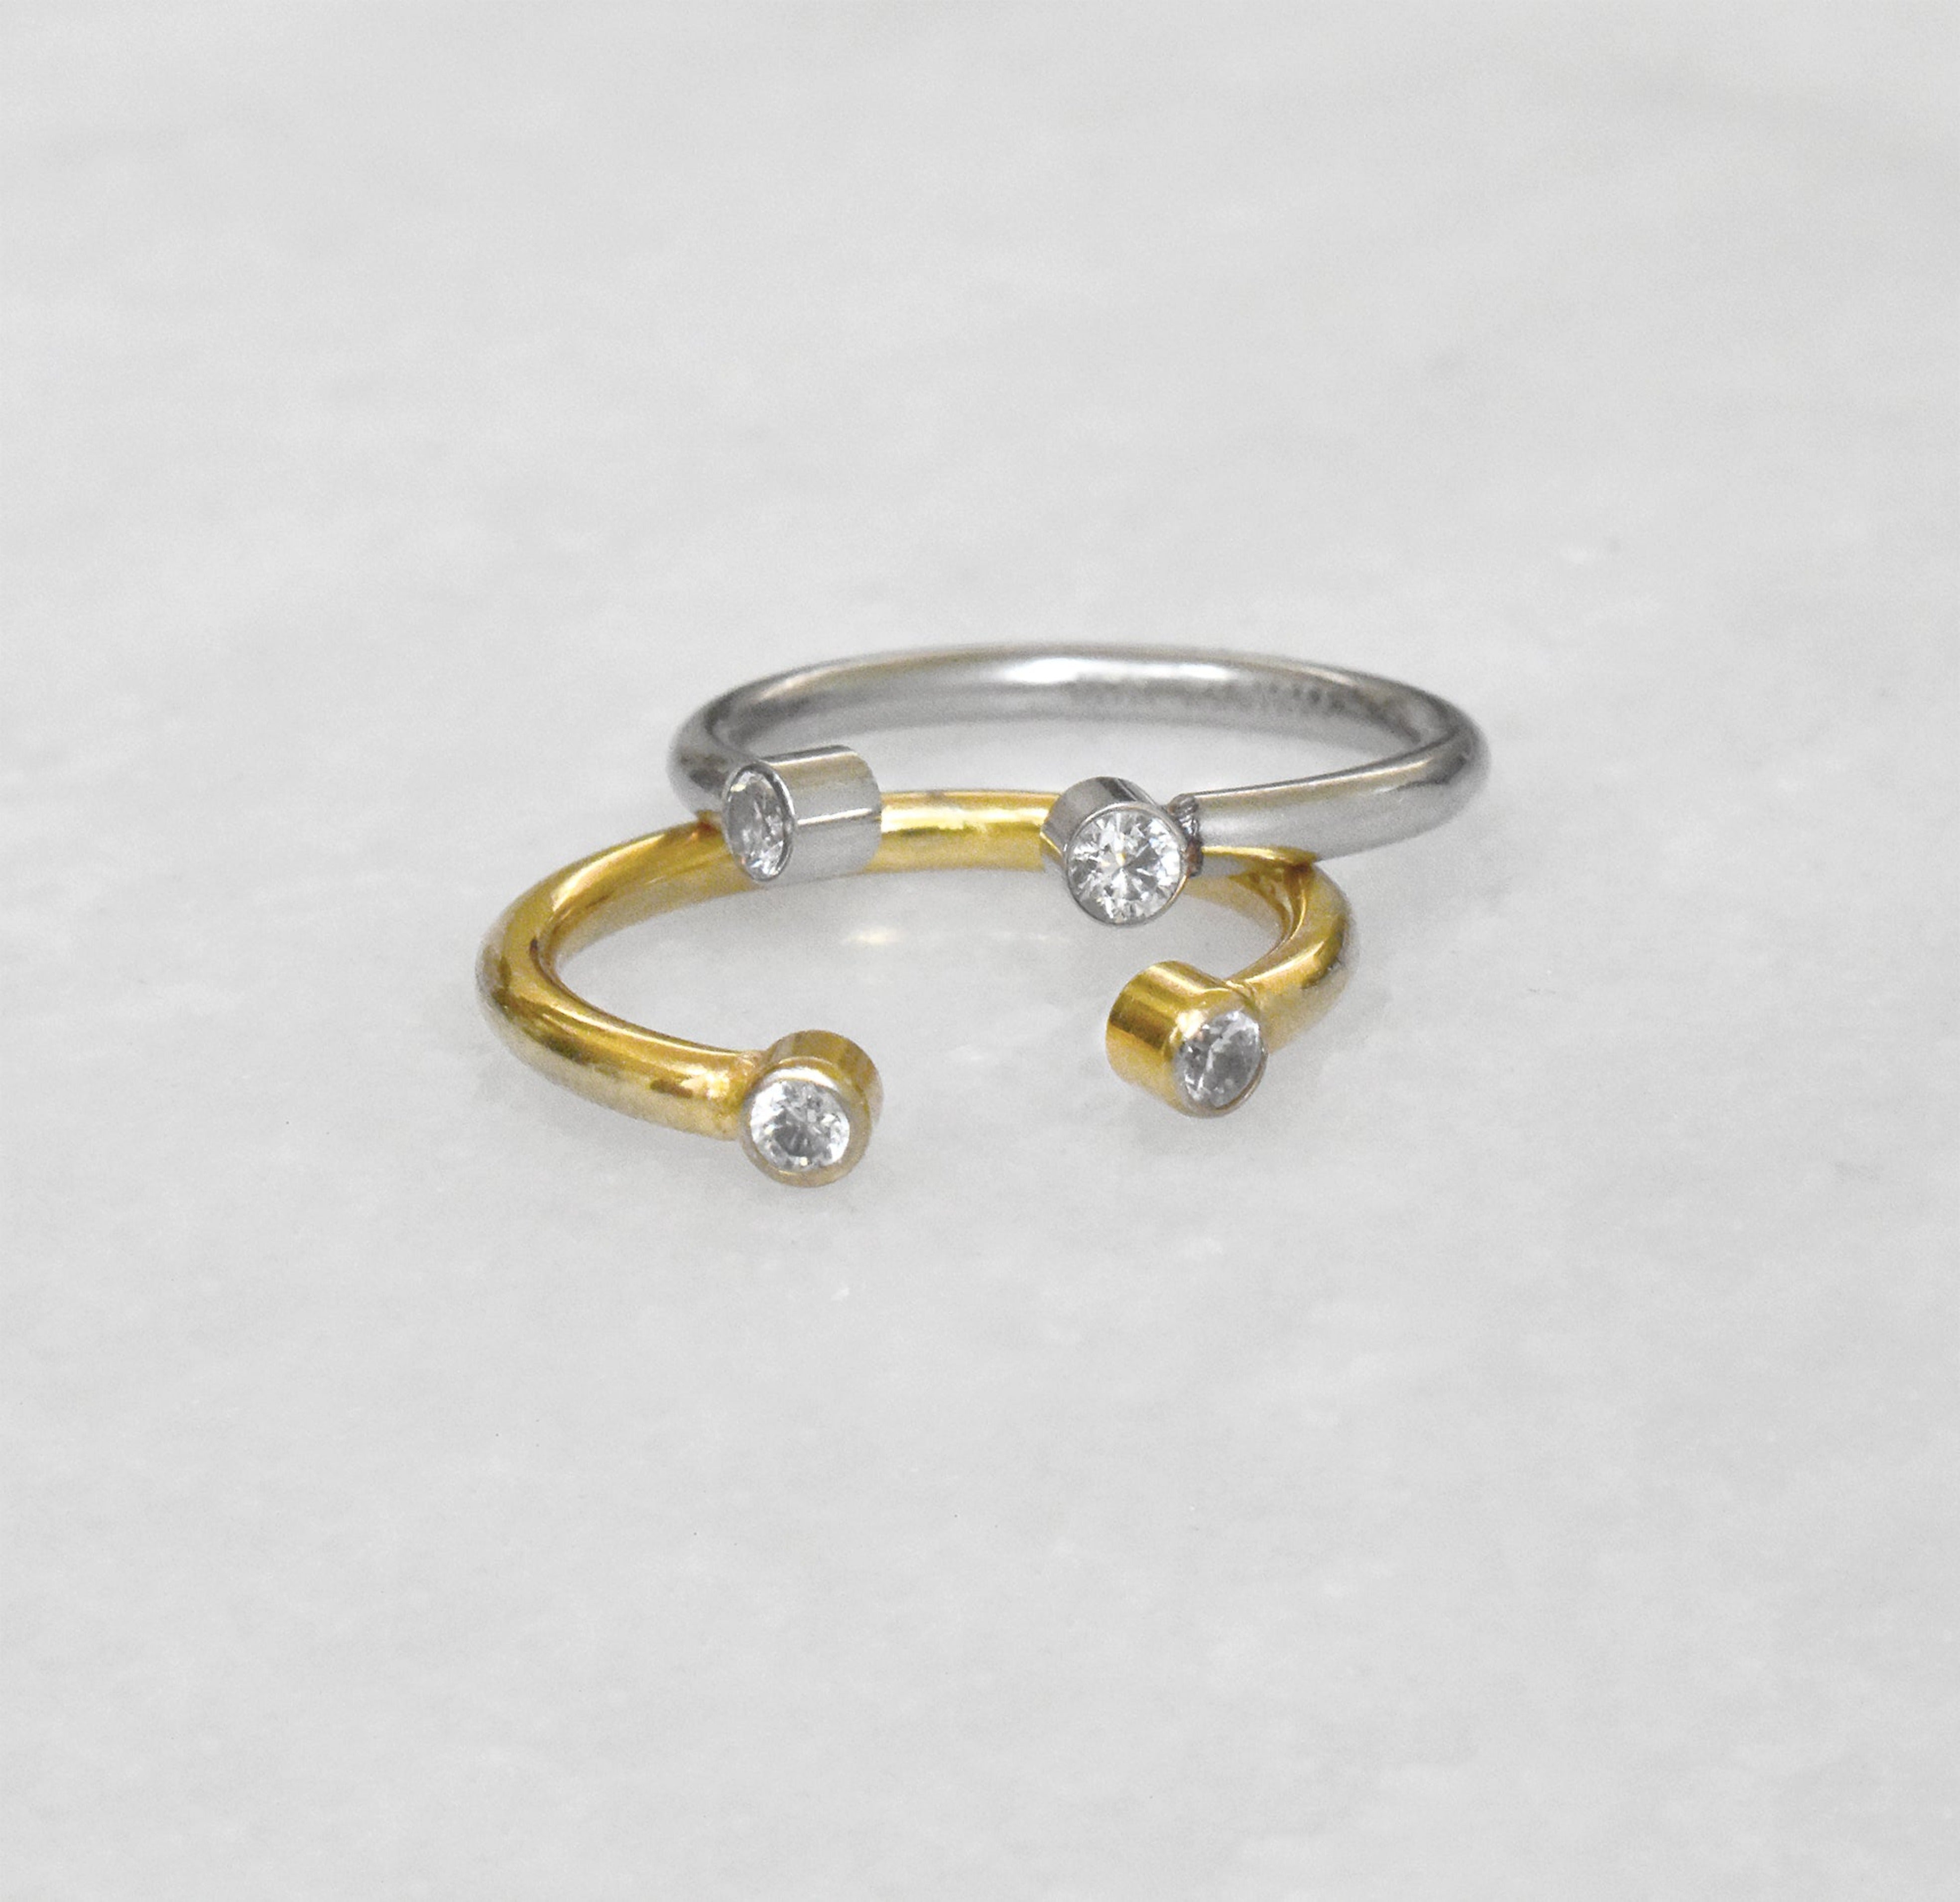 Jolie dainty gold and silver open ring. Waterproof jewelry